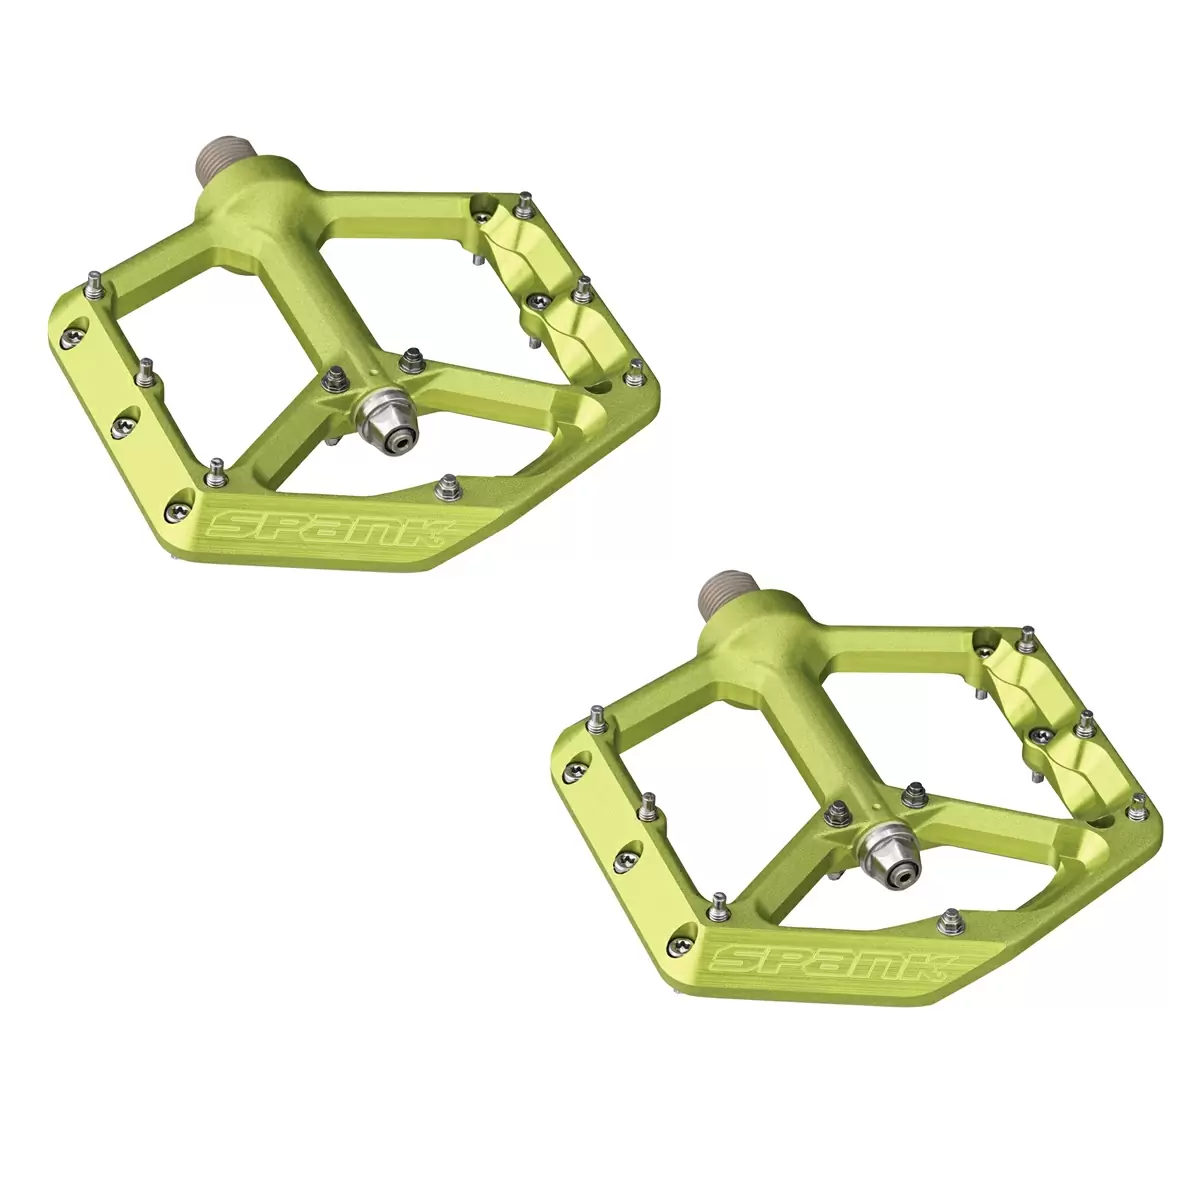 Pair Oozy Reboot Pedals Green - image